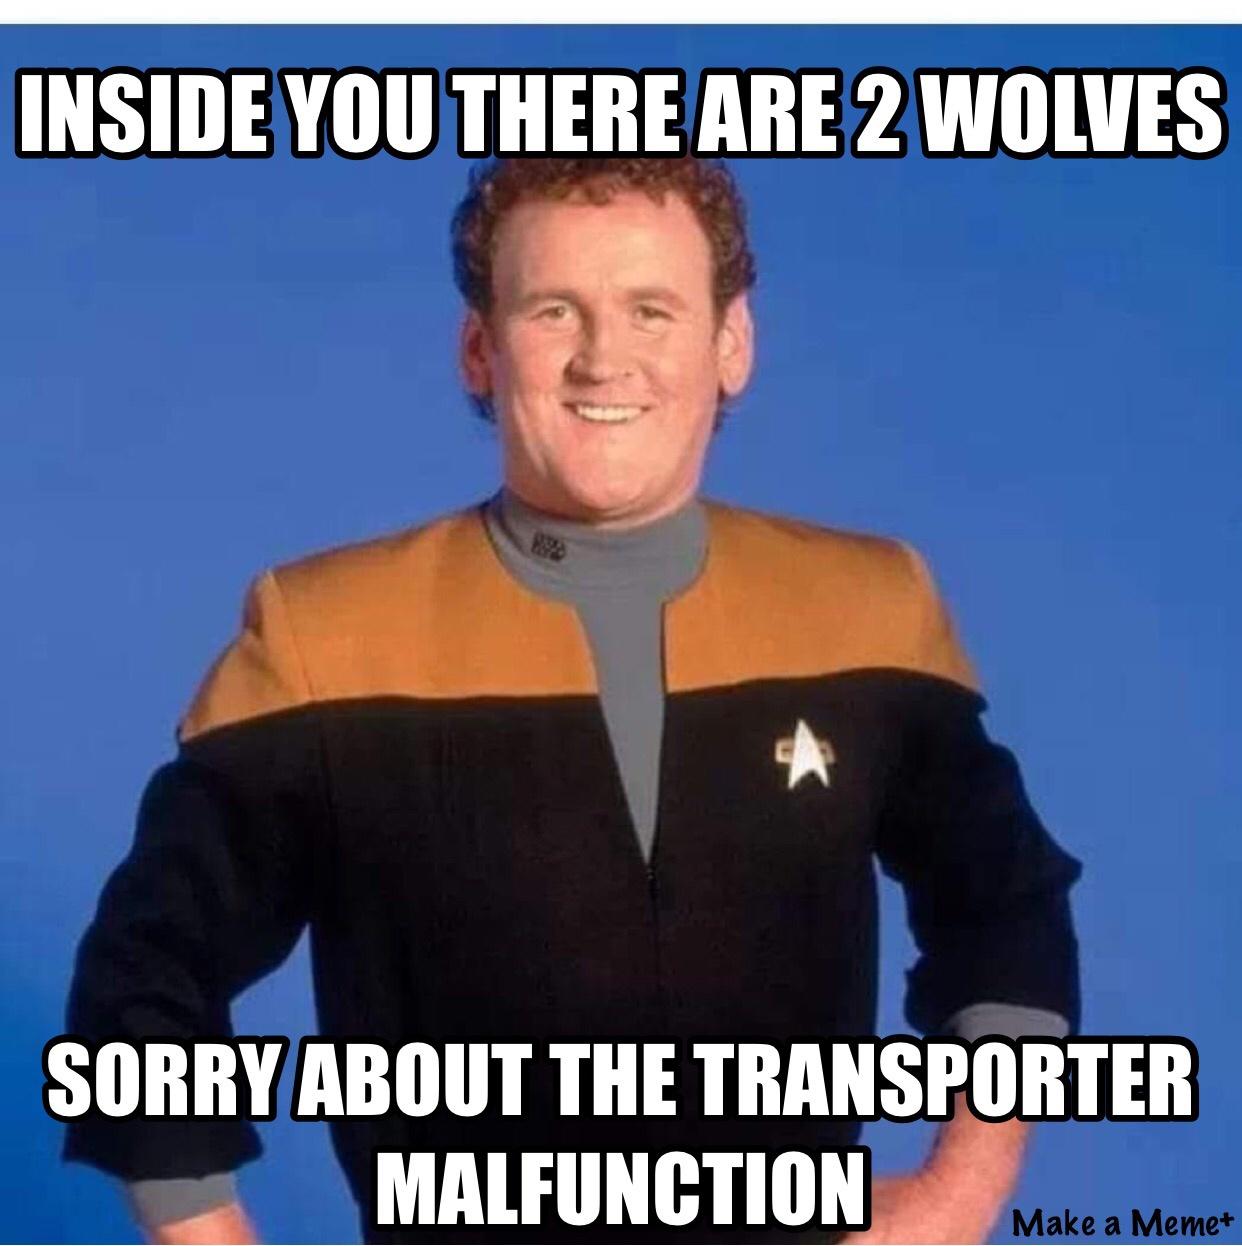 dank memes - inside you there are two wolves sorry - Inside You There Are 2 Wolves Sorry About The Transporter Malfunction Make a Memet